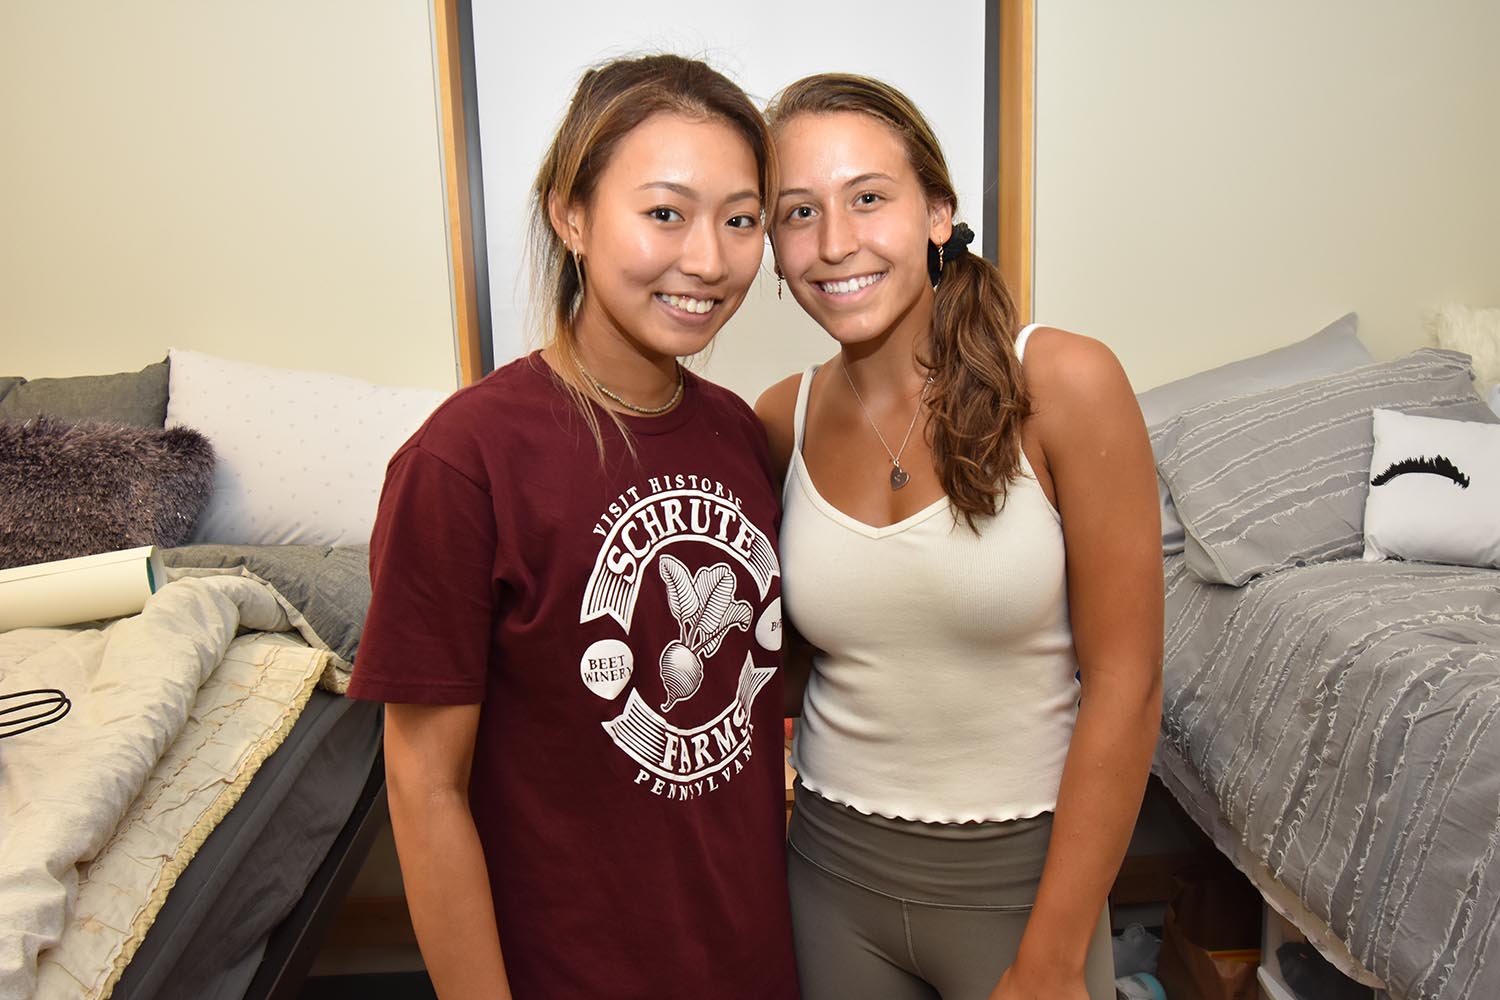 Serim Jin '23 of Portland, Ore. and Caitlin Goldberg '23 of Chicago, Ill. are roommates and members of the women's tennis team. "When I visited campus I just knew Wesleyan was for me," Jin said. “I love the vibe of the whole campus.” Jin is leaning toward studying economics. Goldberg is considering a major in economics or computer science. “When I first visited Wes, it was beautiful and I could see myself studying here.”